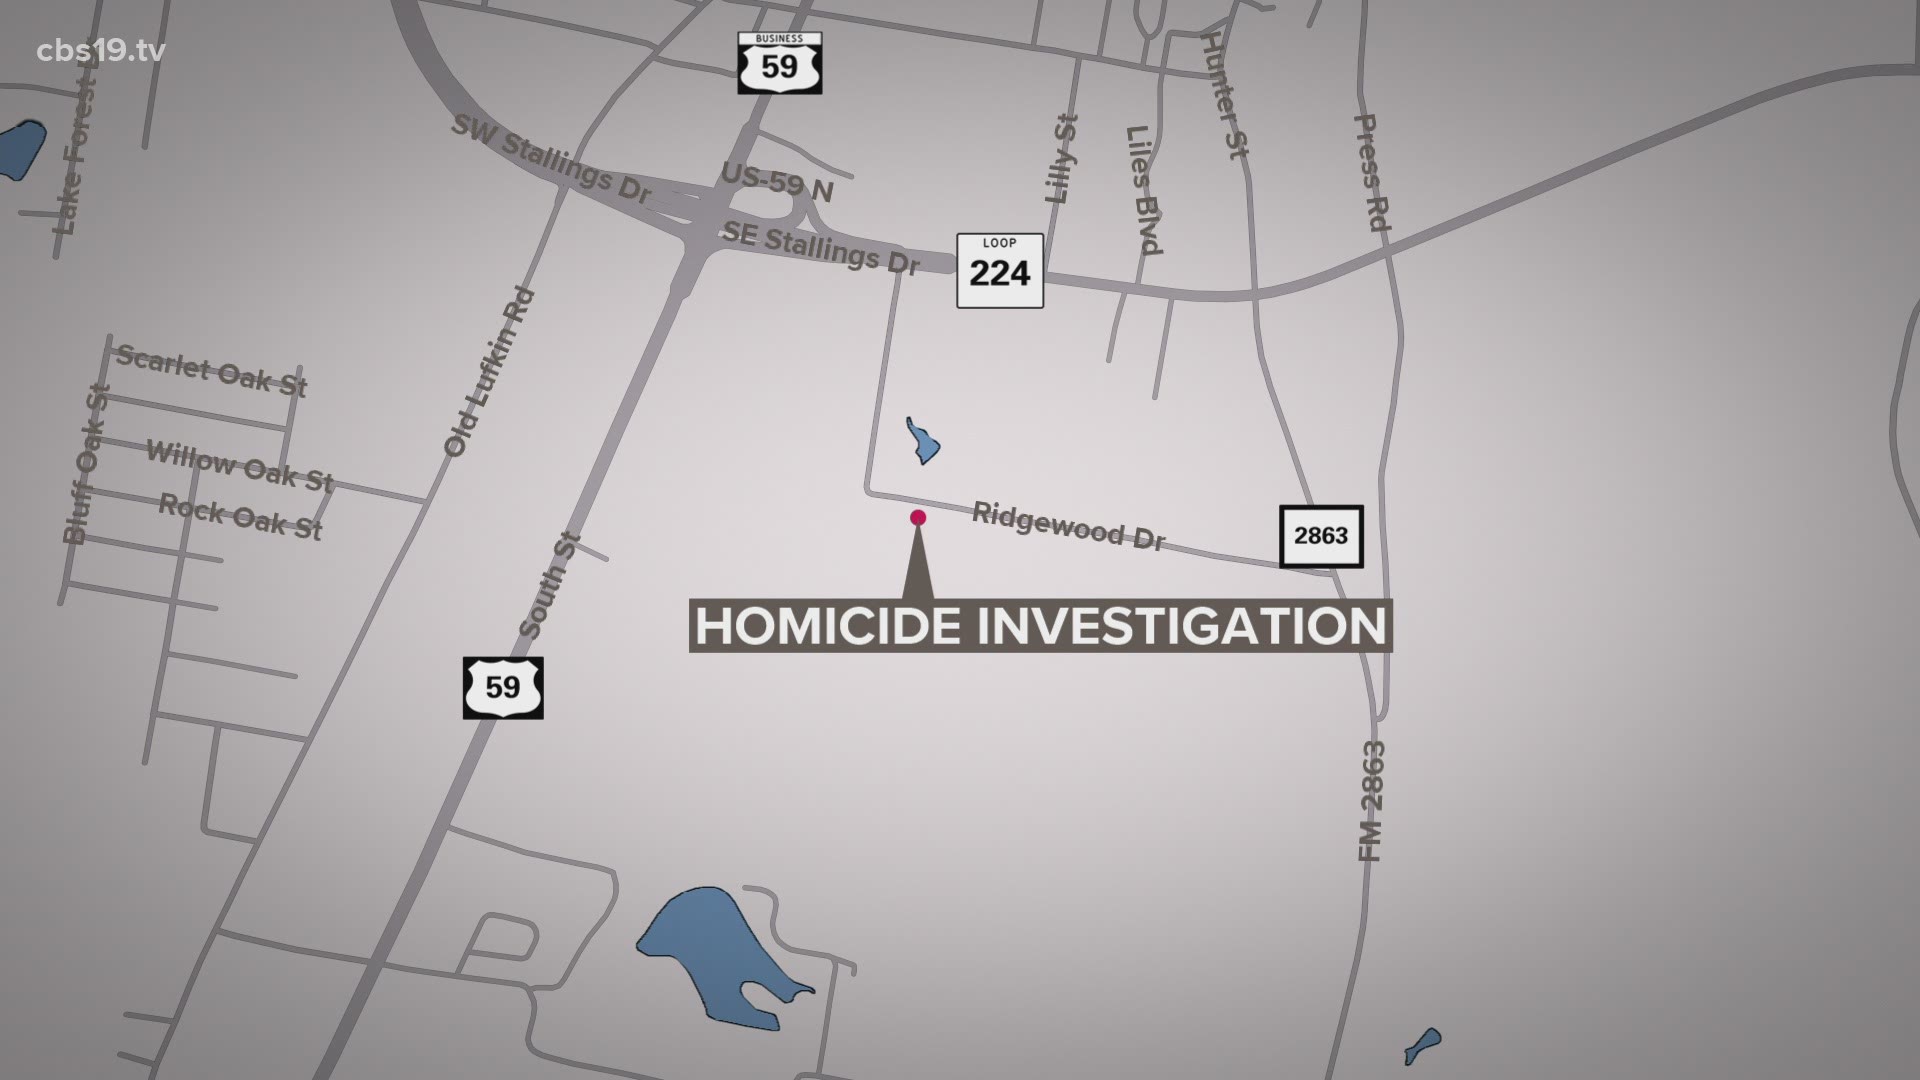 The Nacogdoches Police Department has opened a homicide investigation after a man was found dead inside a home Friday morning.